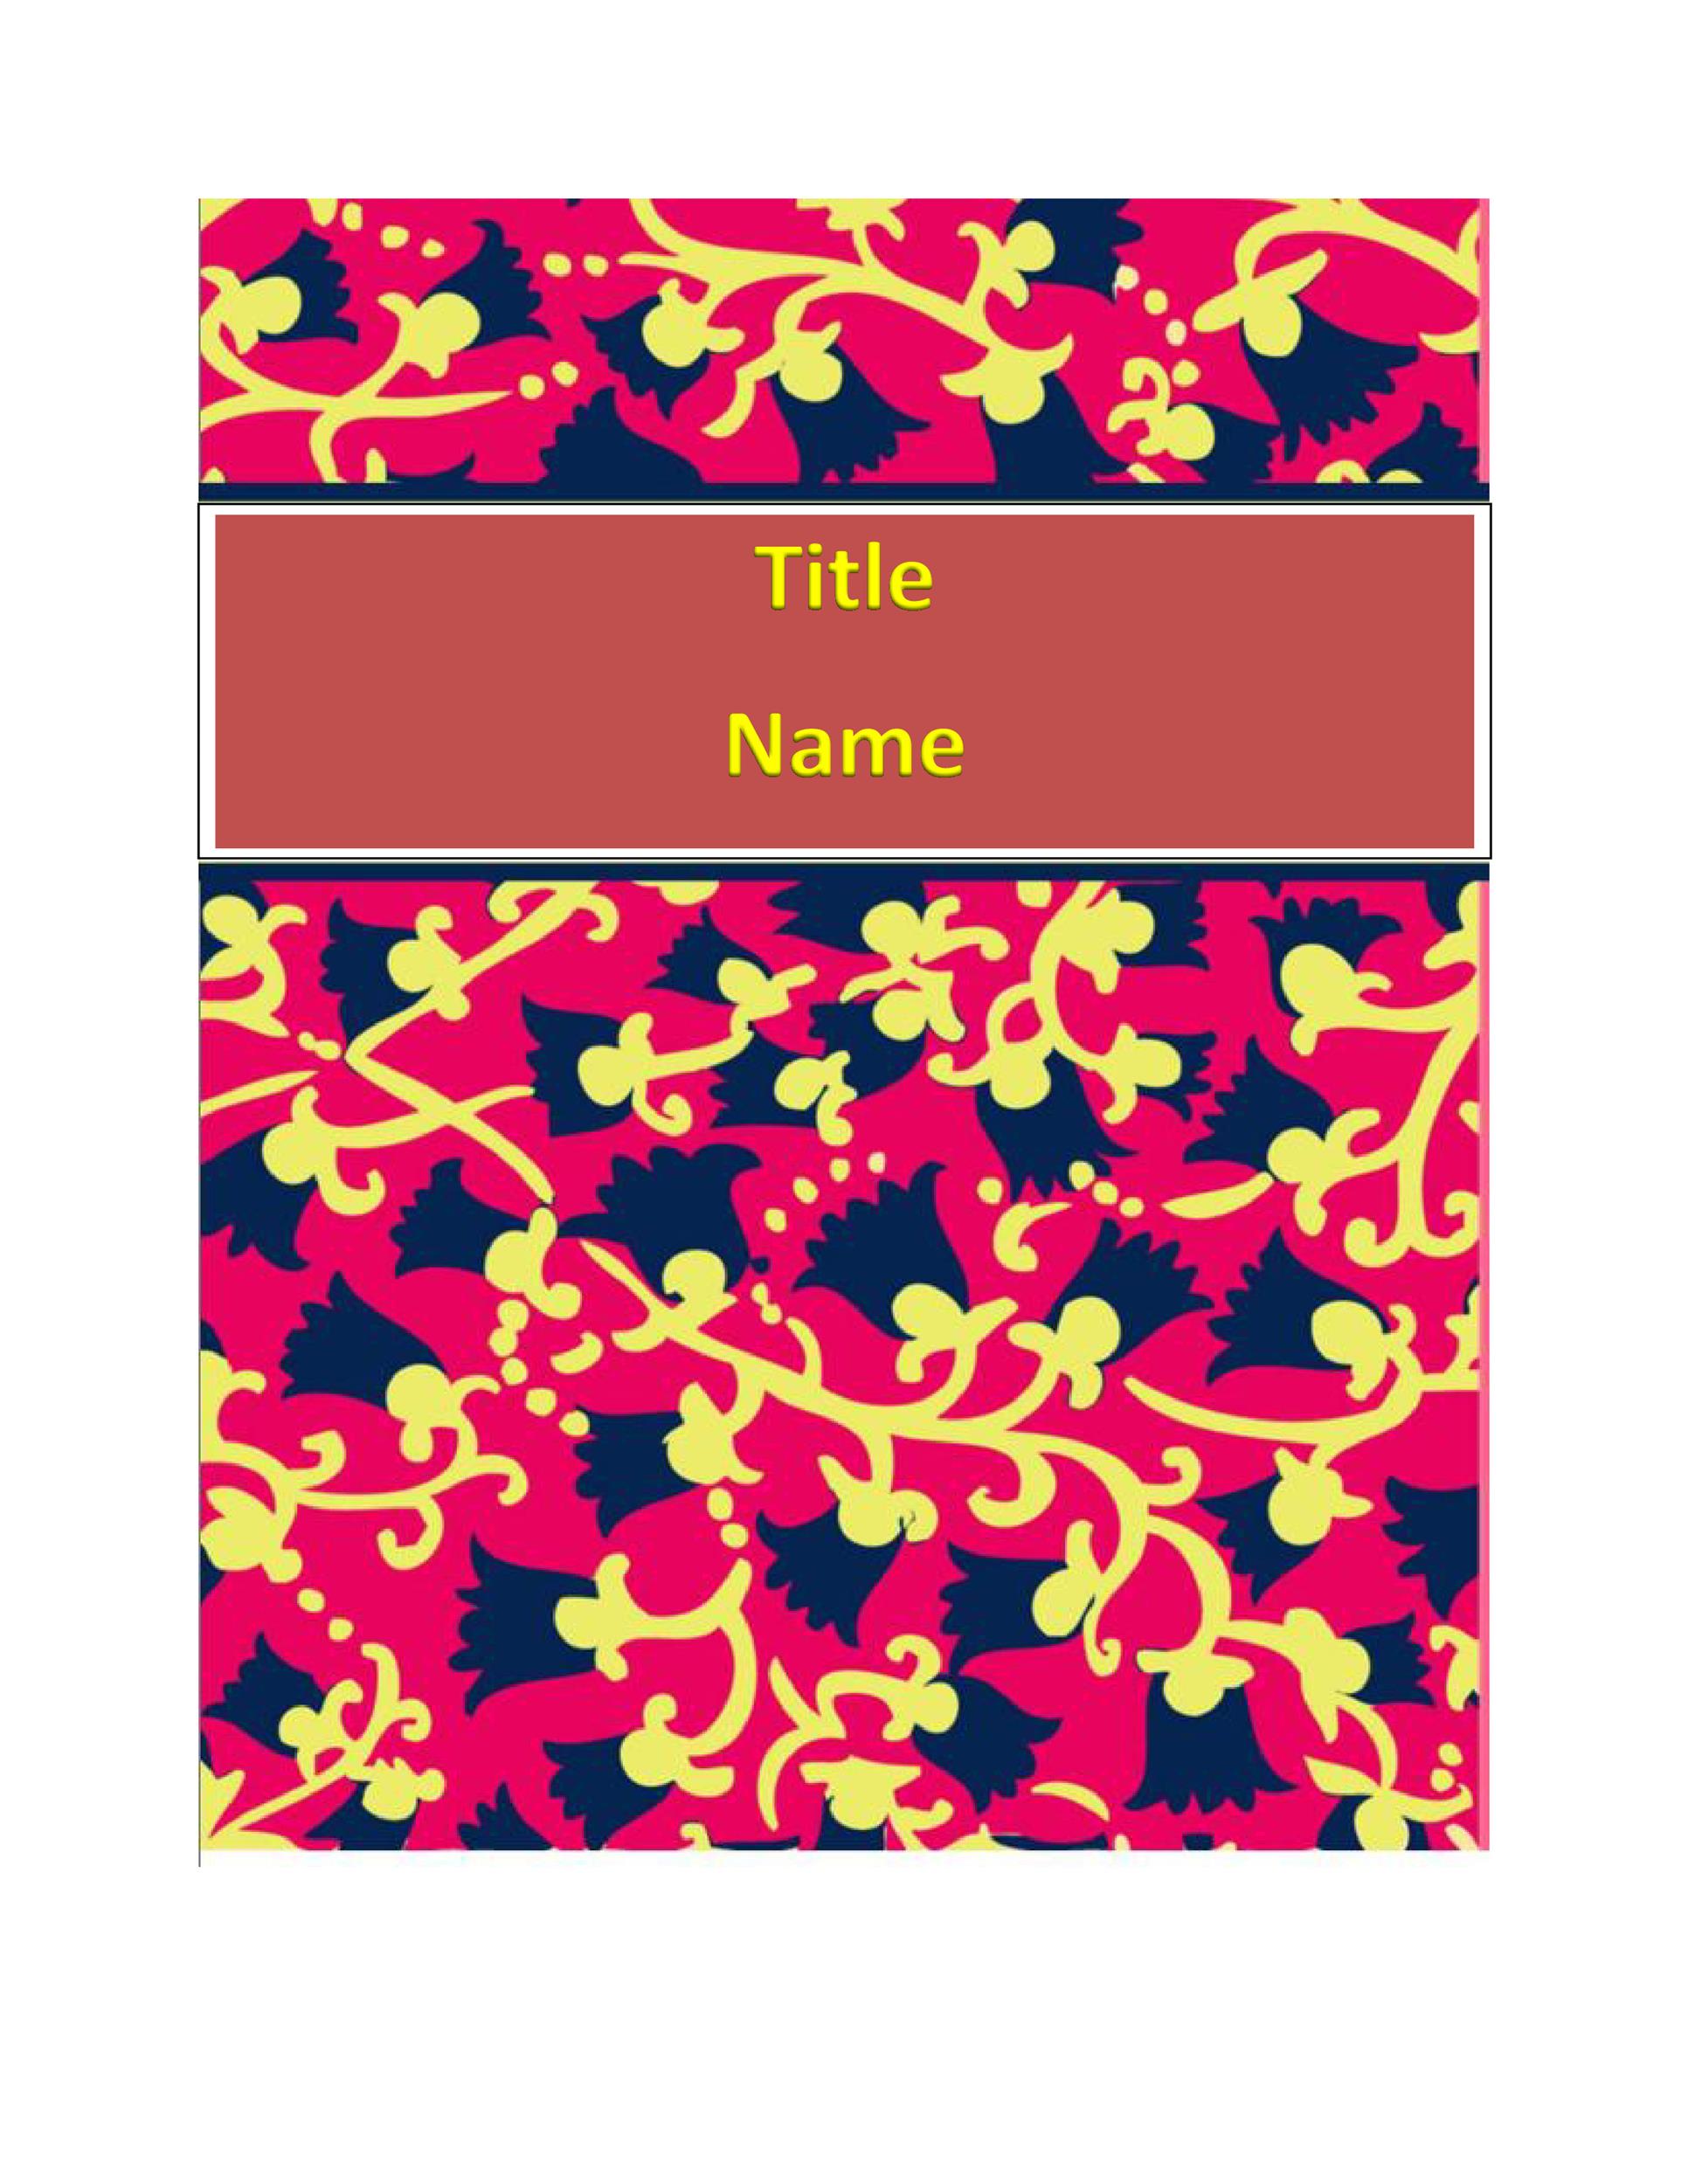 Binder Cover Templates.